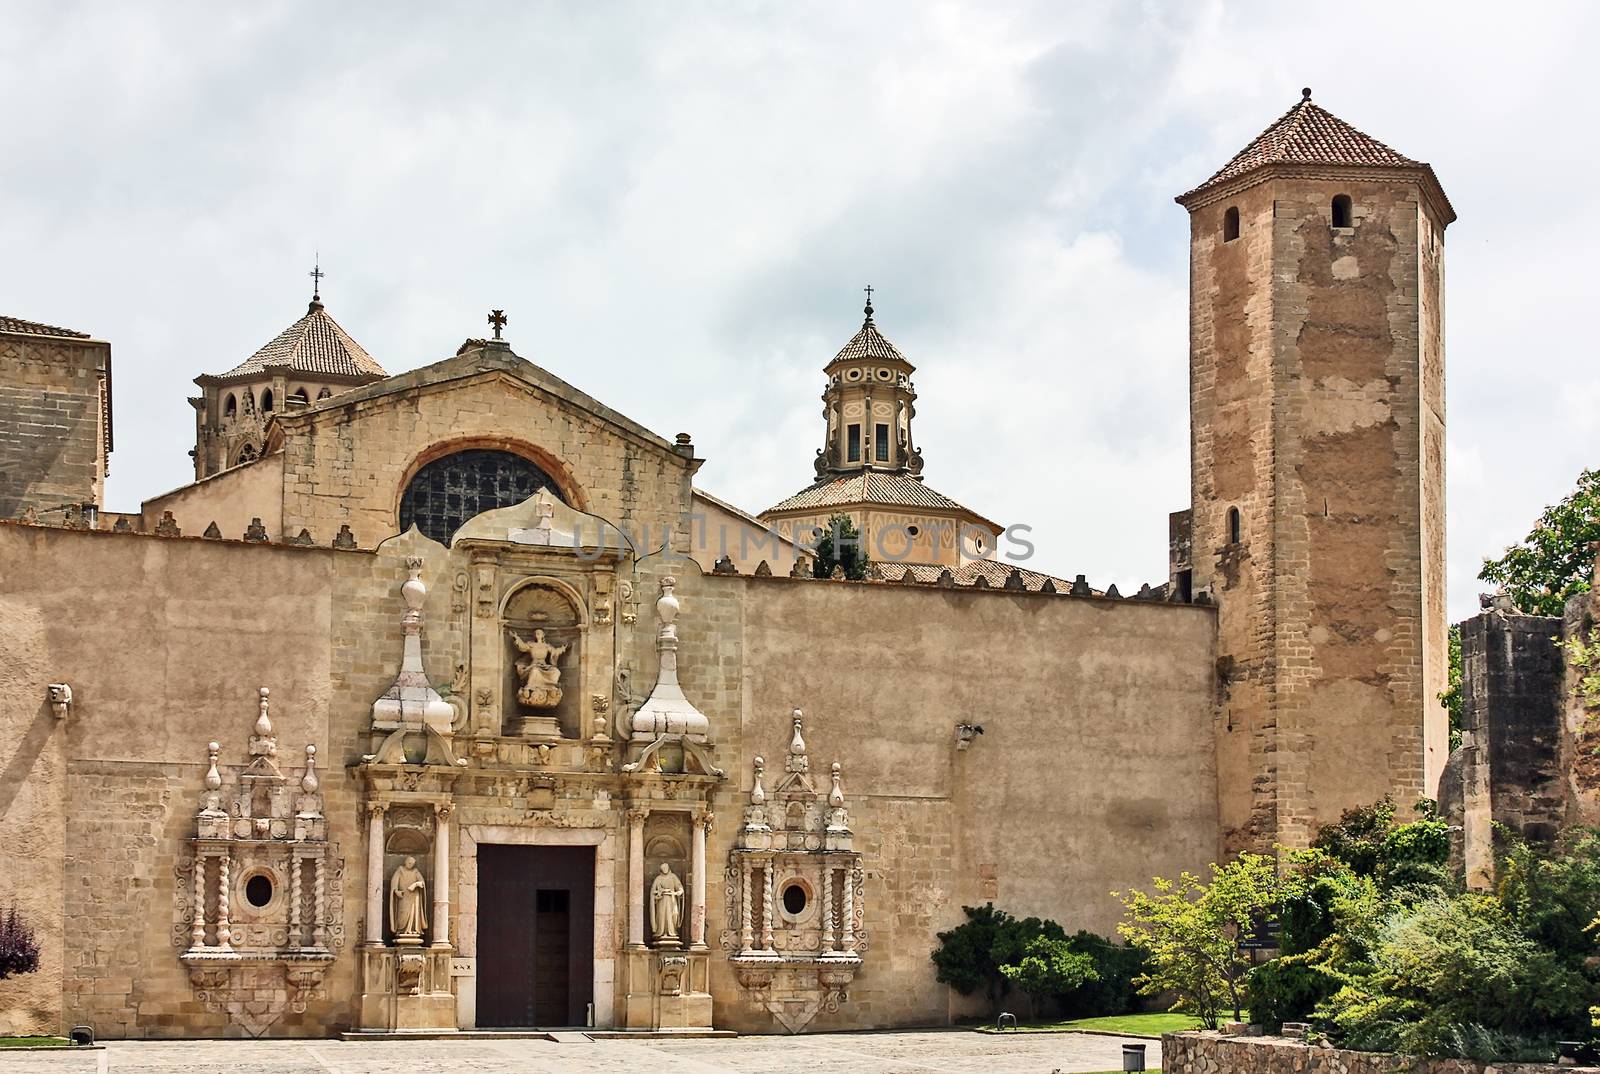 The Monastery of Santa Maria de Poblet is a haven of tranquillity and a resting place of kings. 